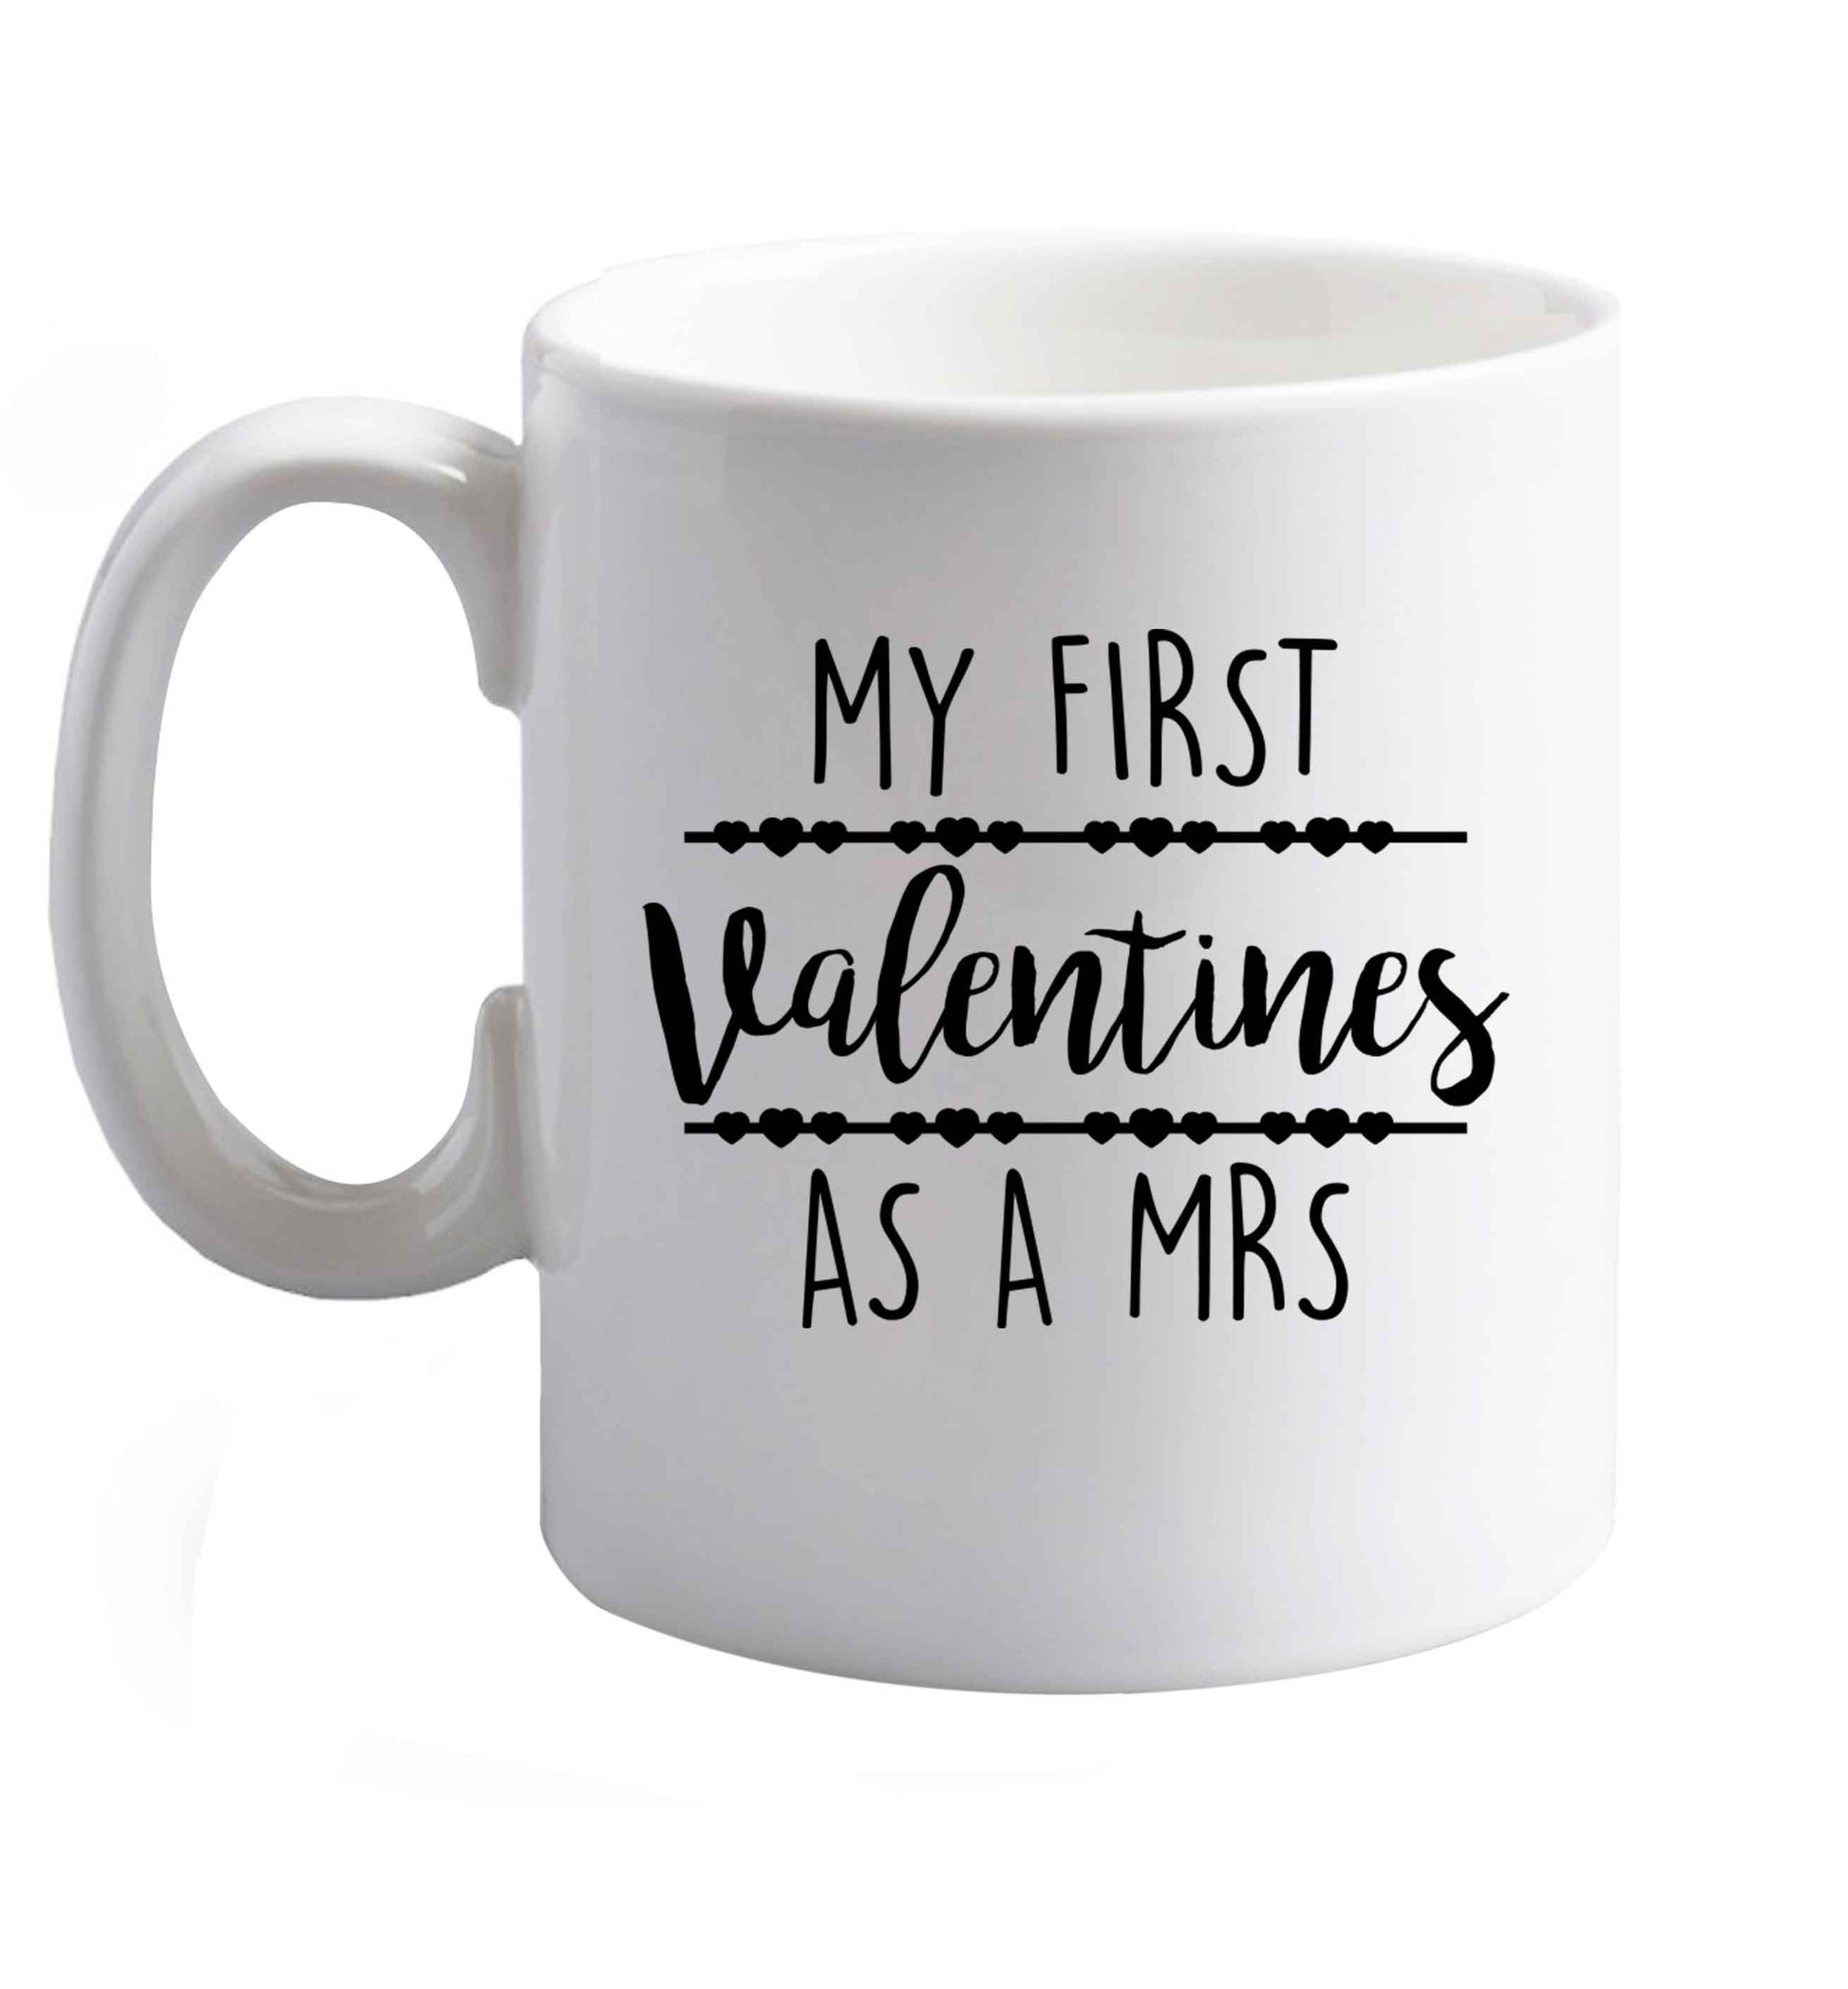 10 oz My first valentines as a Mrs ceramic mug right handed